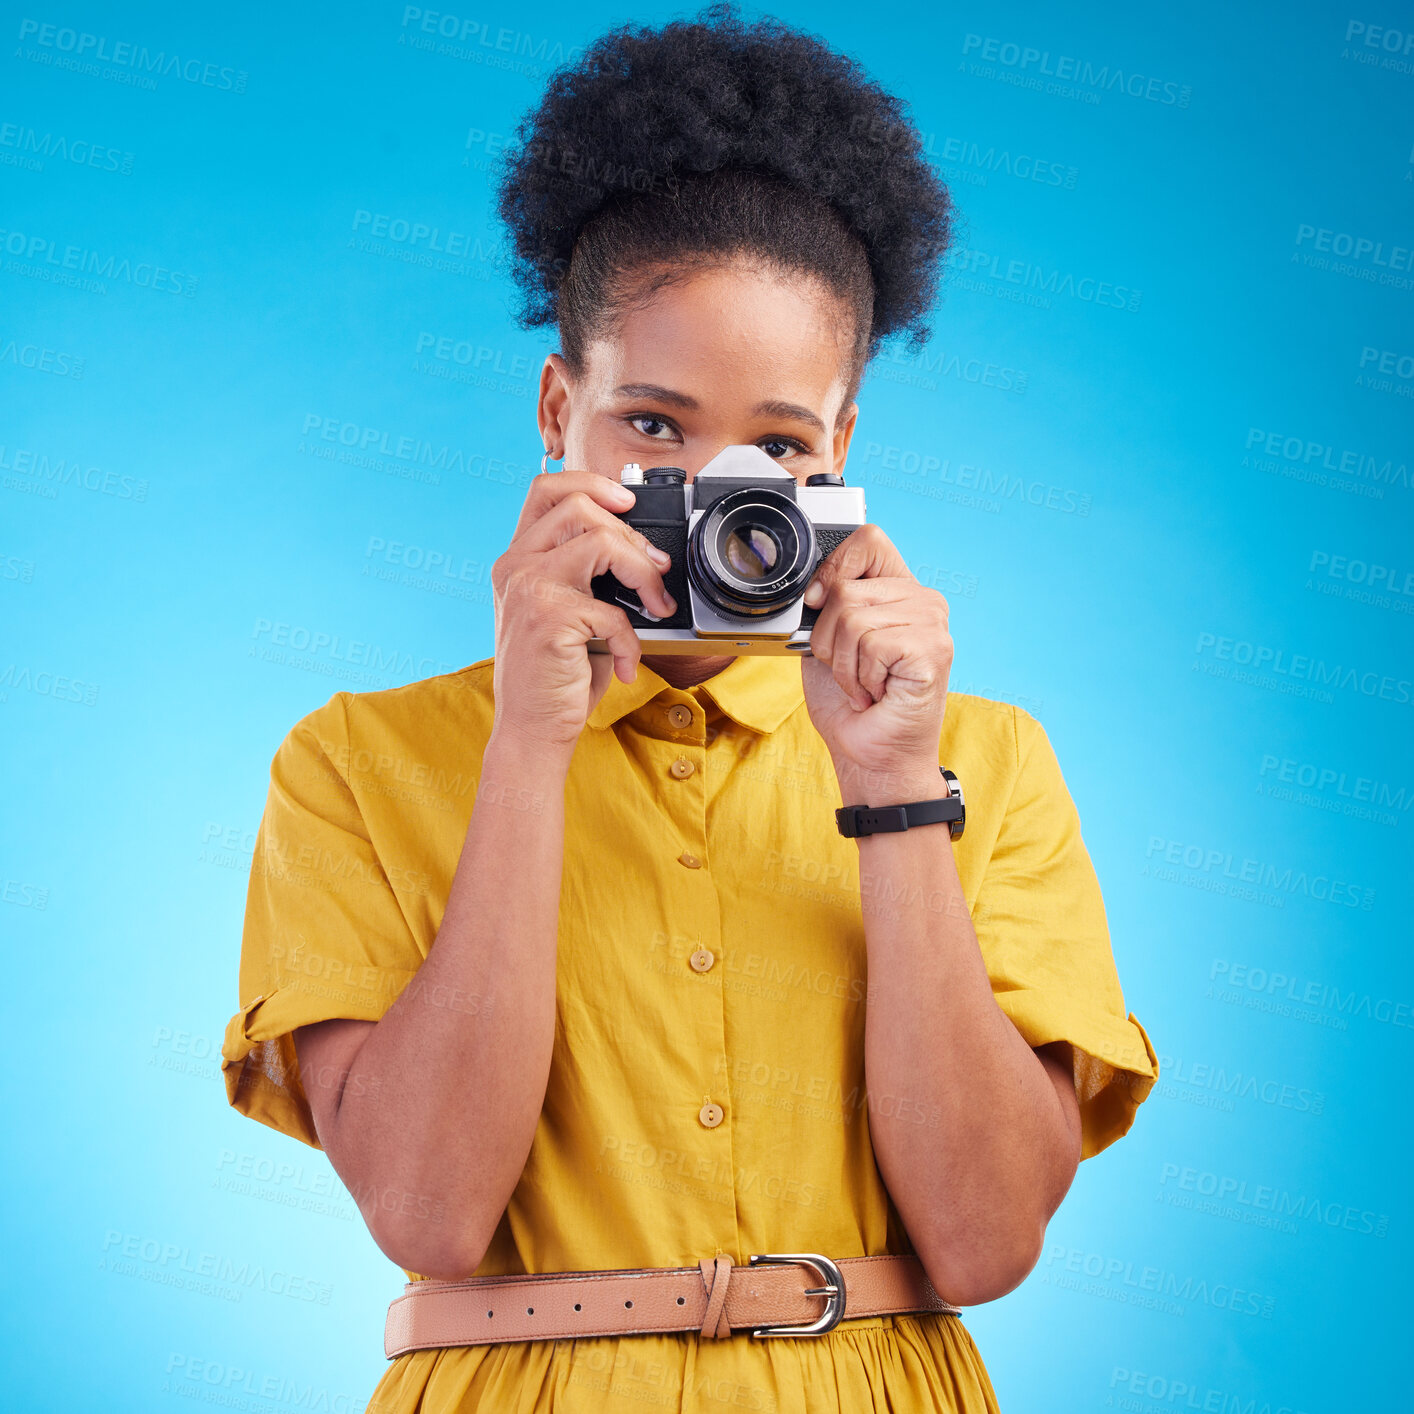 Buy stock photo Photography, portrait and black woman with camera isolated on blue background, creative artist job talent. Art, face of happy photographer with hobby or career in studio on travel holiday photoshoot.